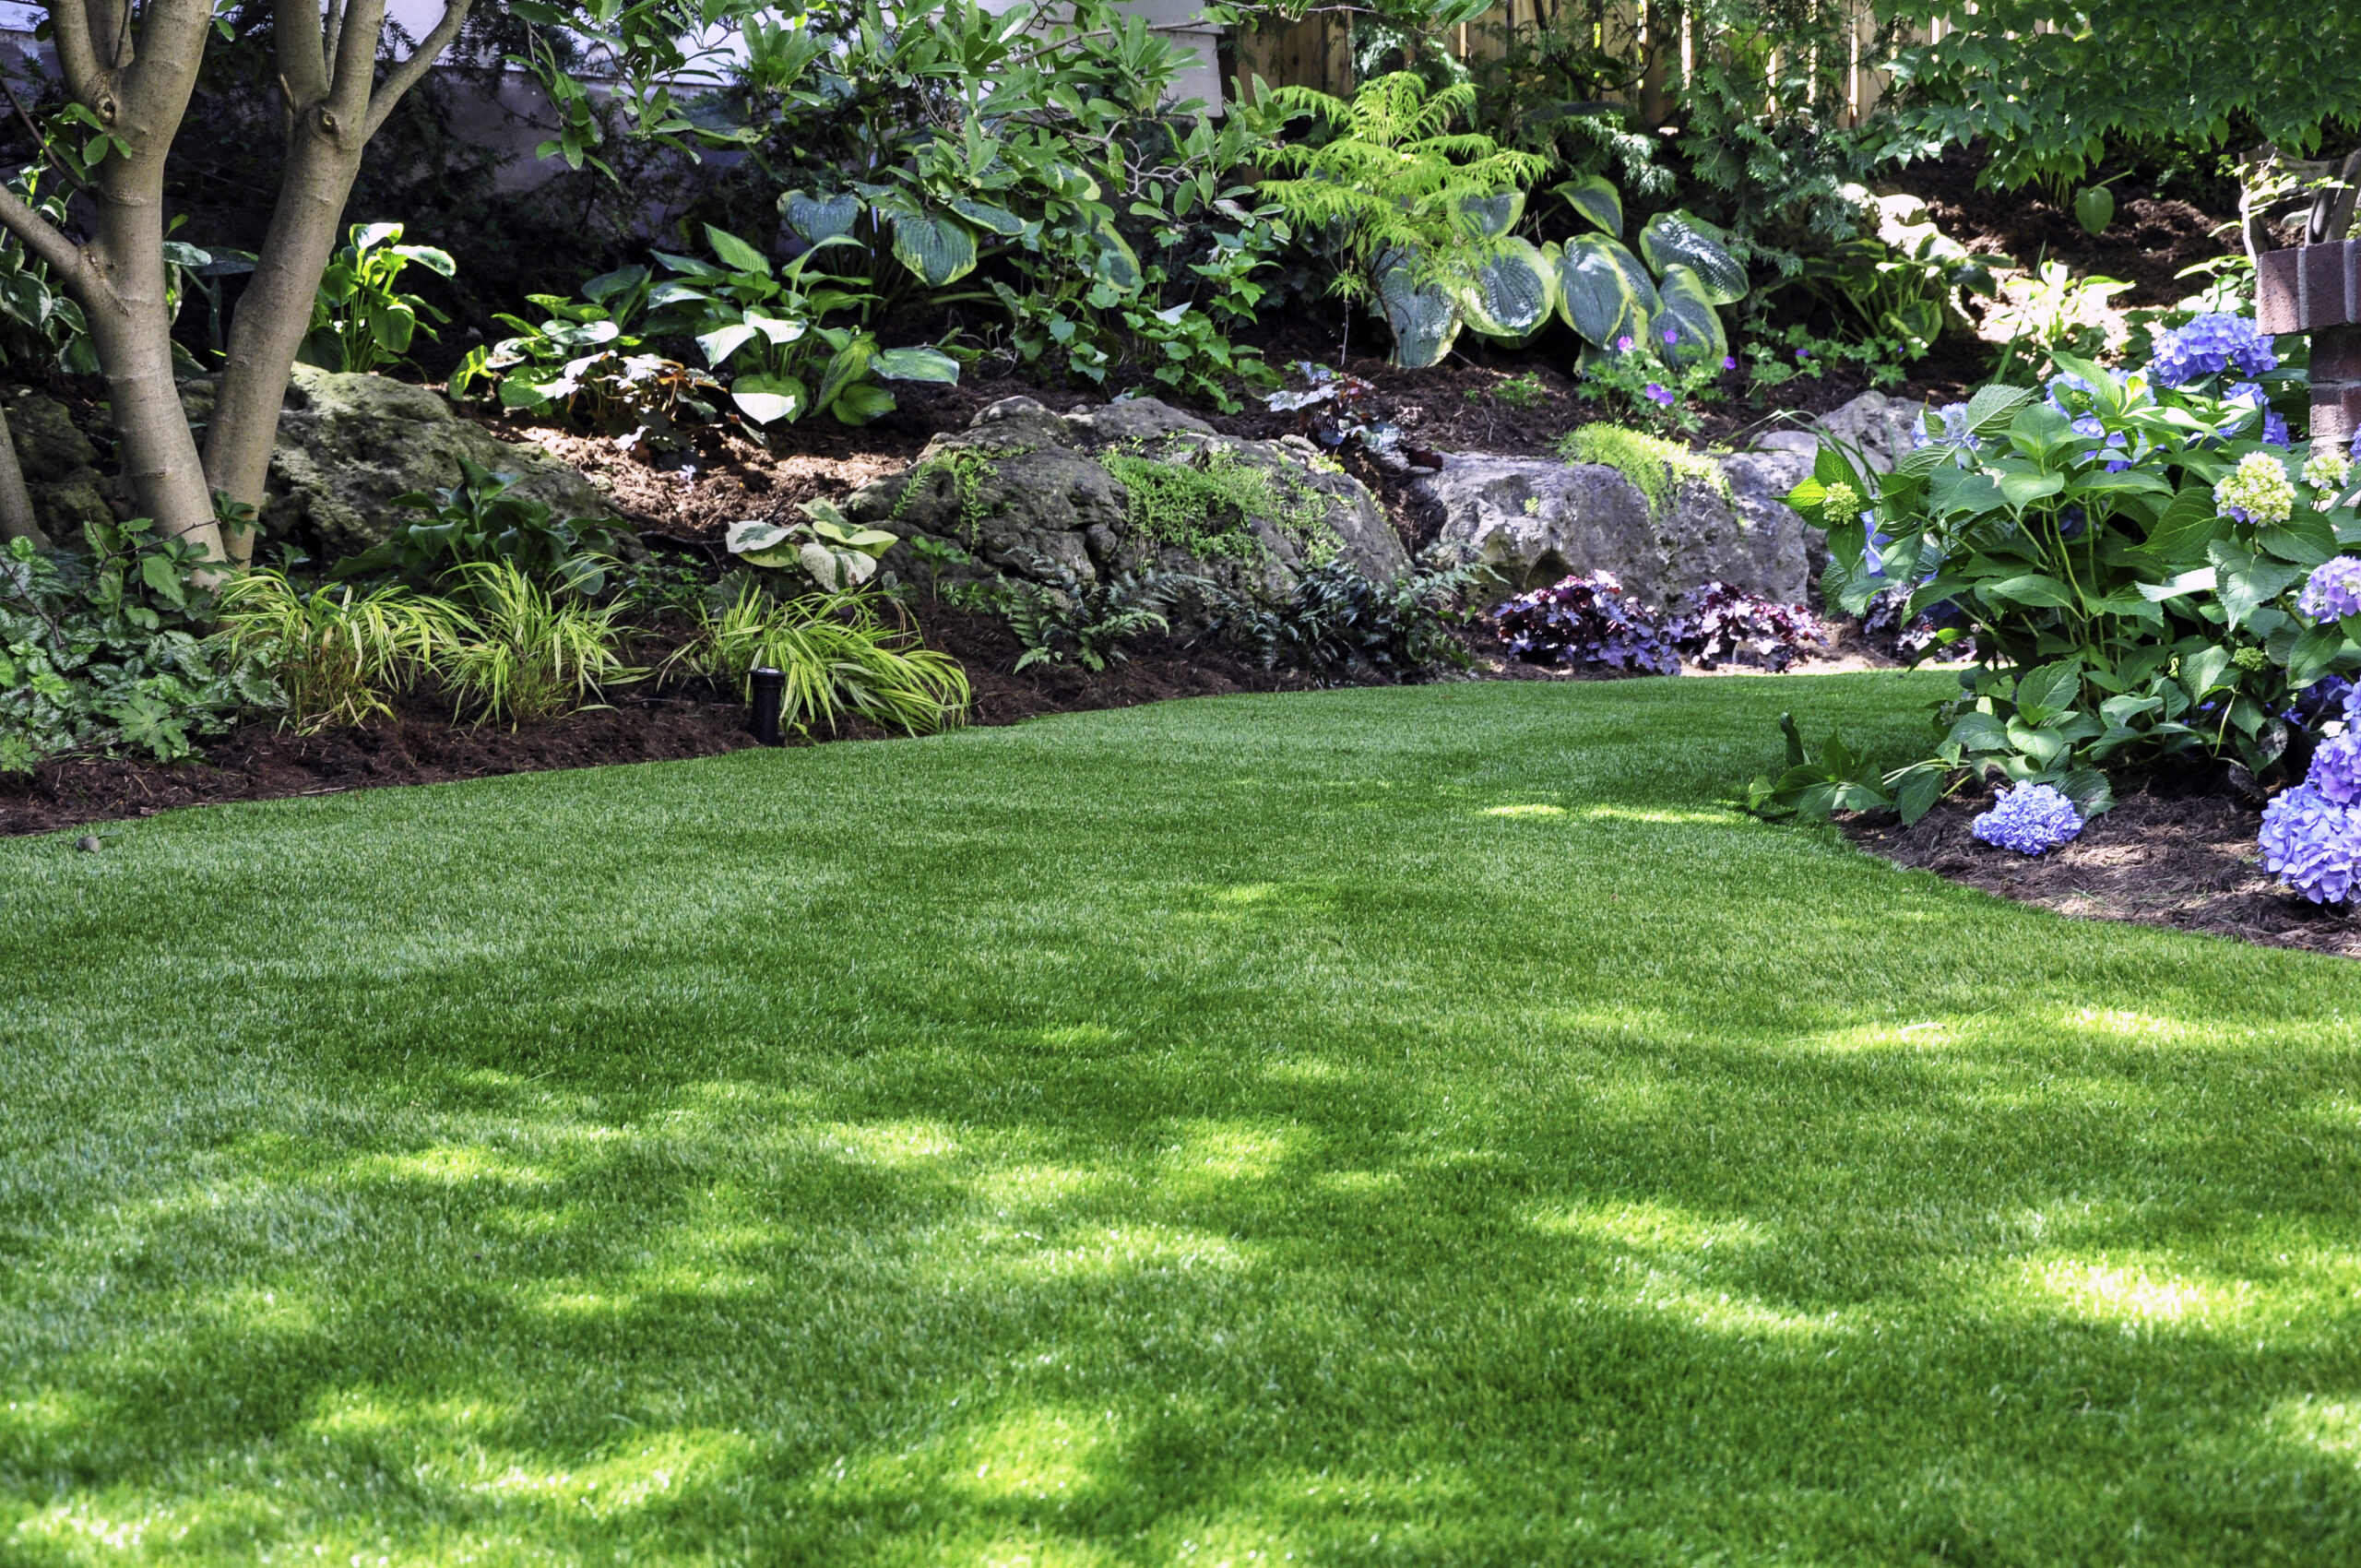 This beautiful backyard woodland garden features a maintenance free lawn made of natural looking artificial grass, a huge landscaping trend for small spaces.